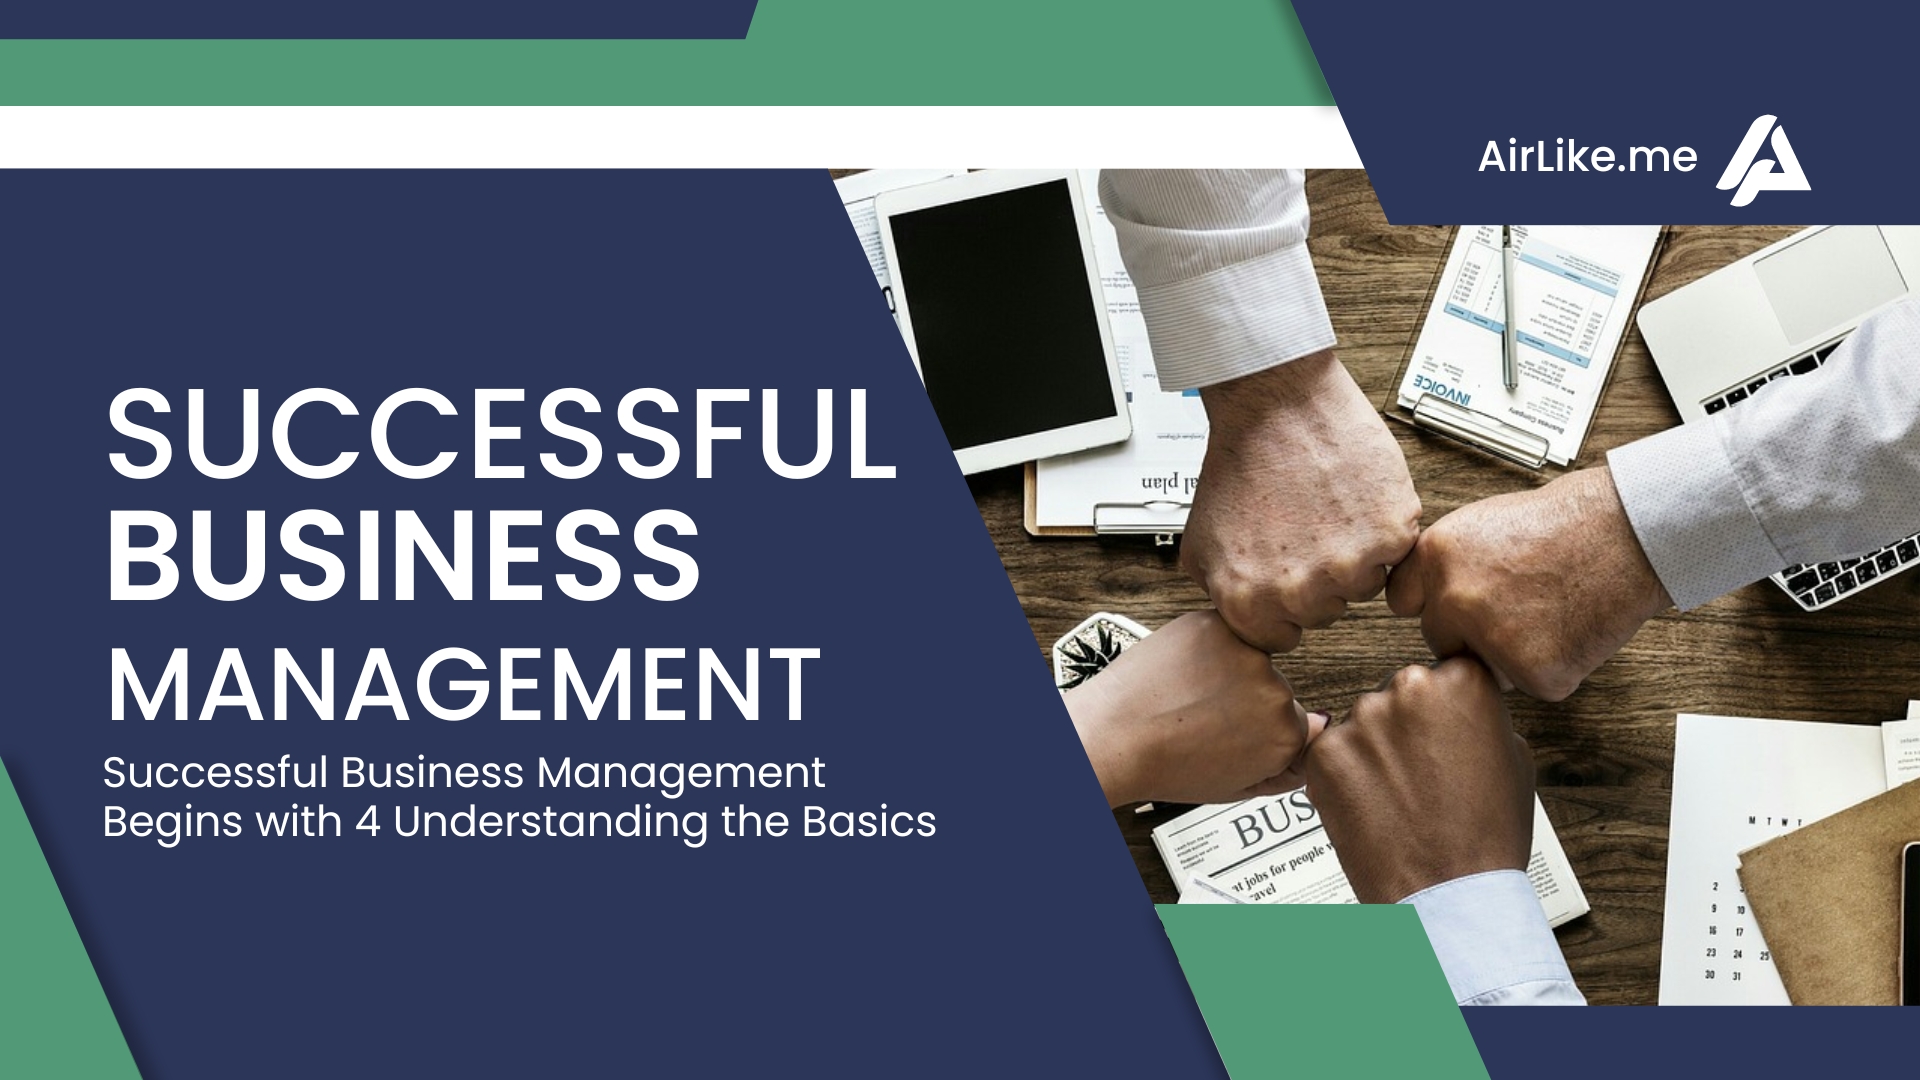 Successful Business Management Begins with 4 Understanding the Basics